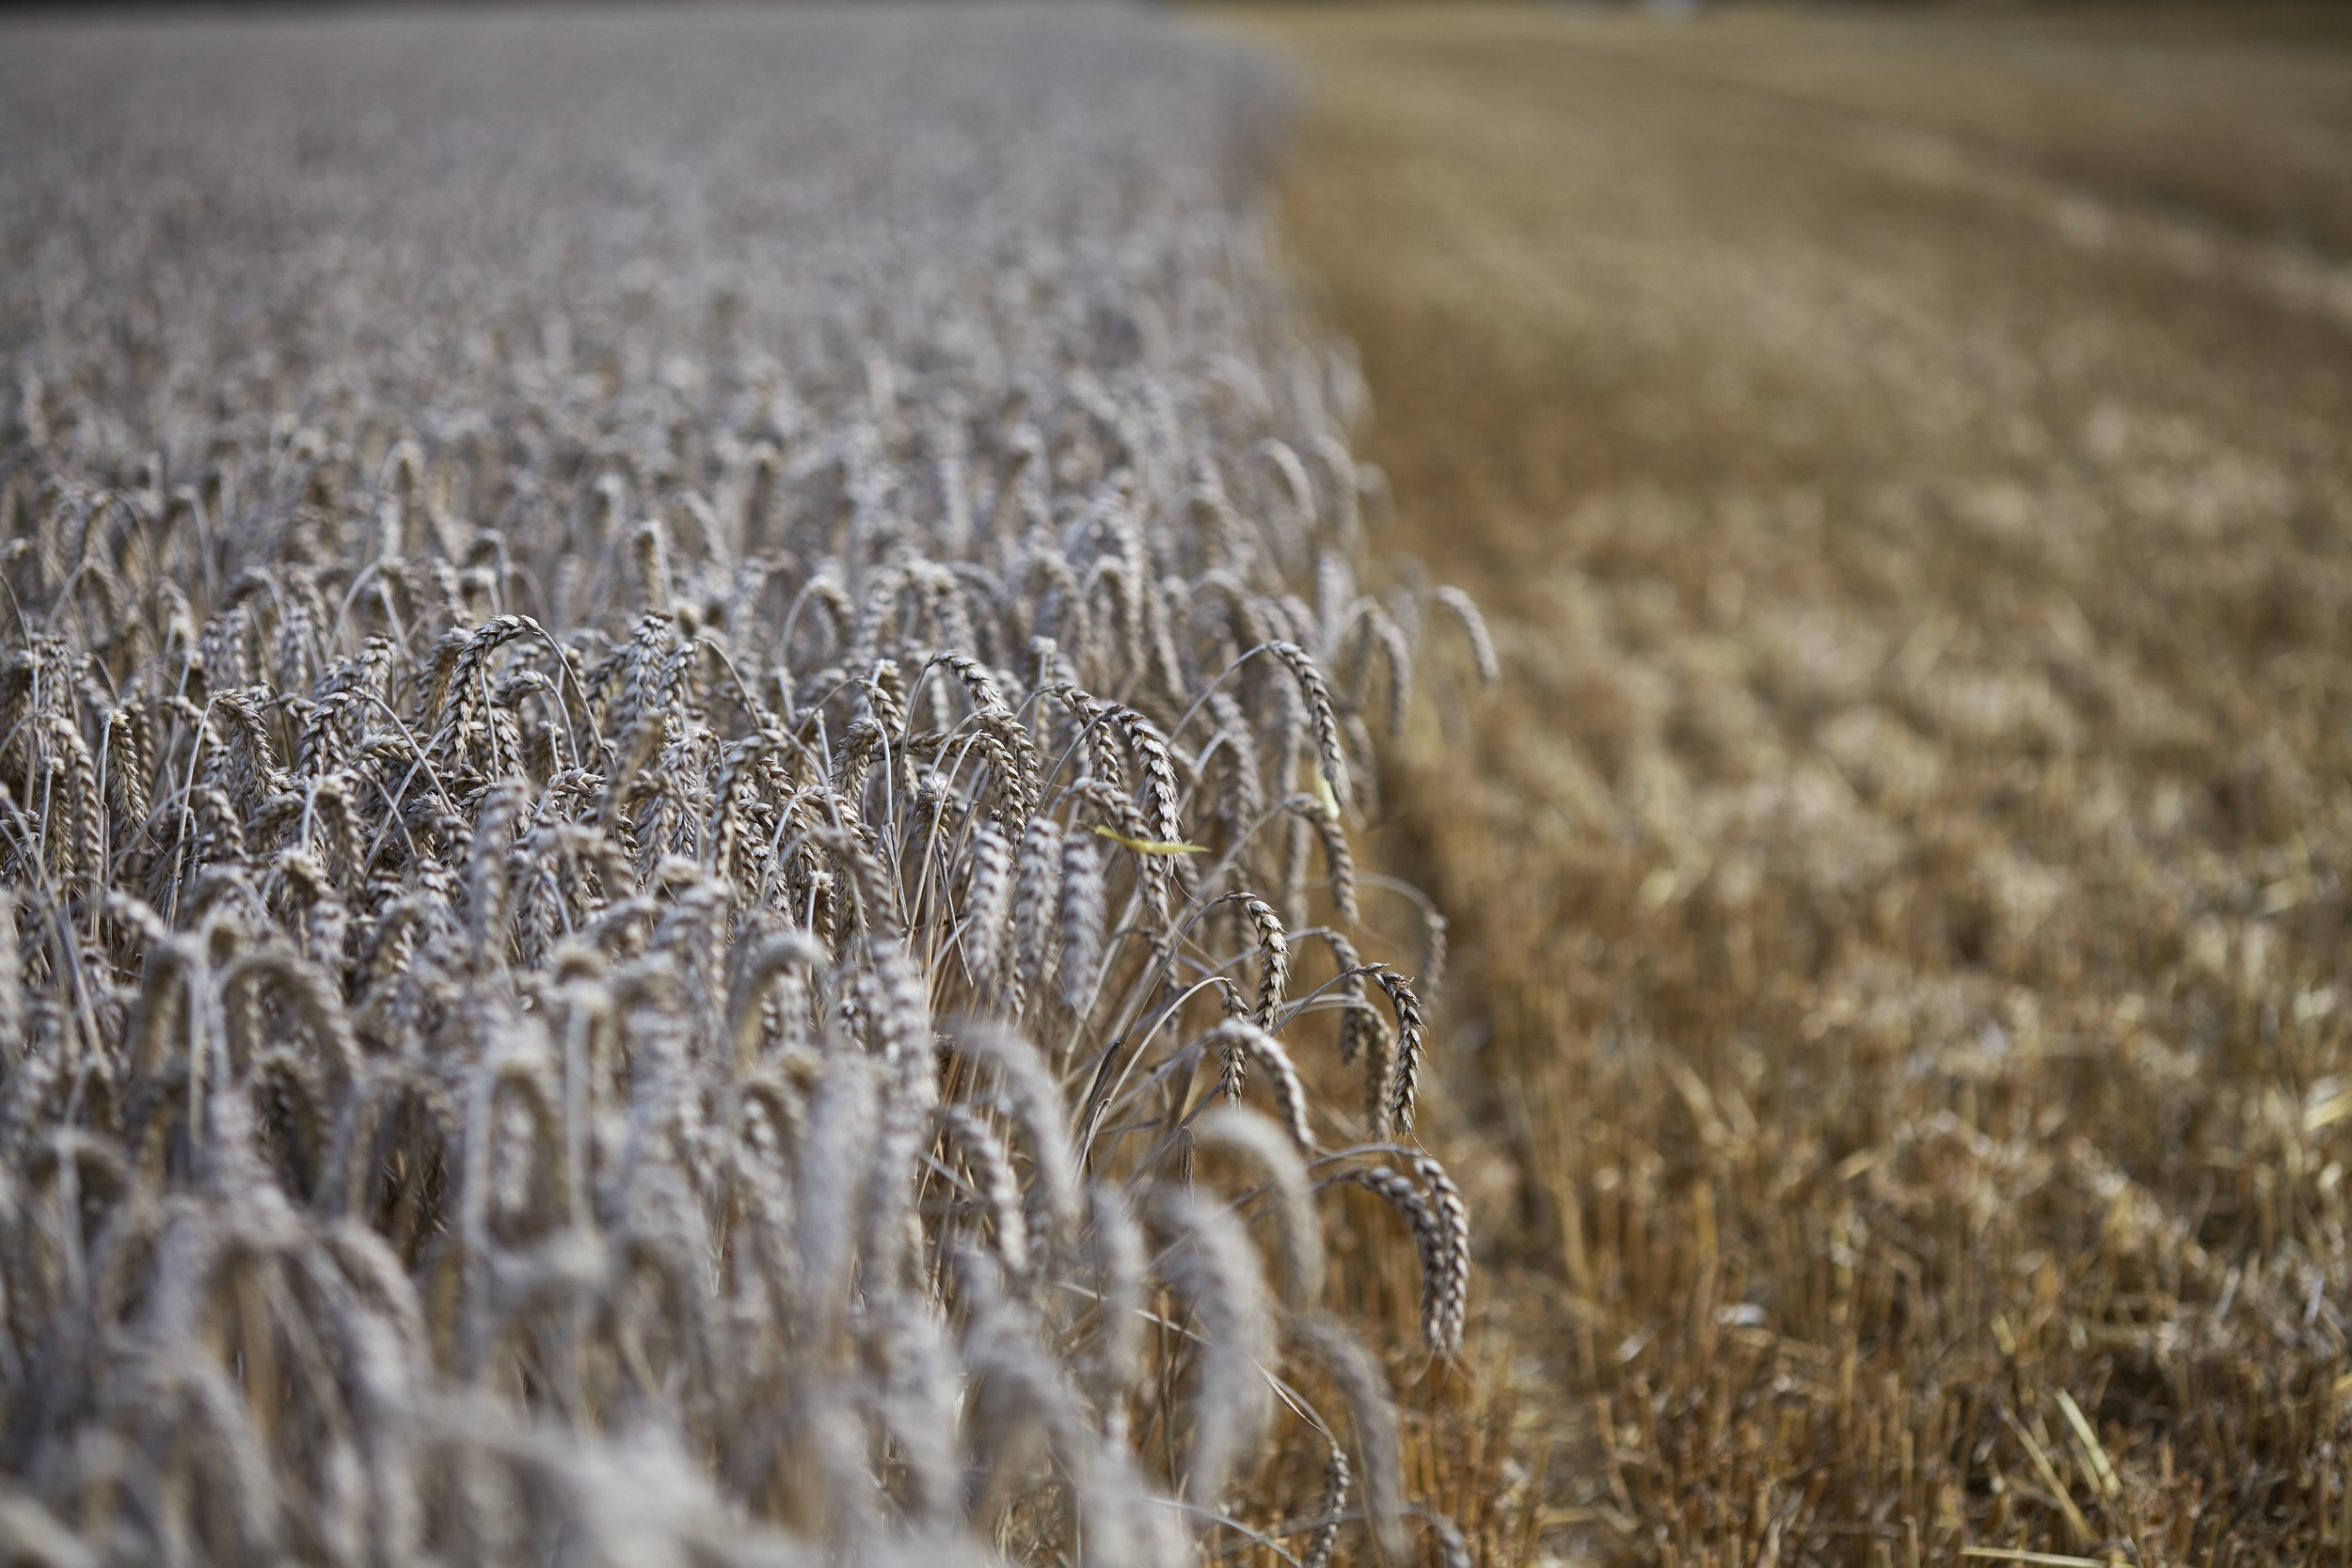 Photograph by Hatty Frances Bell of wheat growing in a field in Norfolk